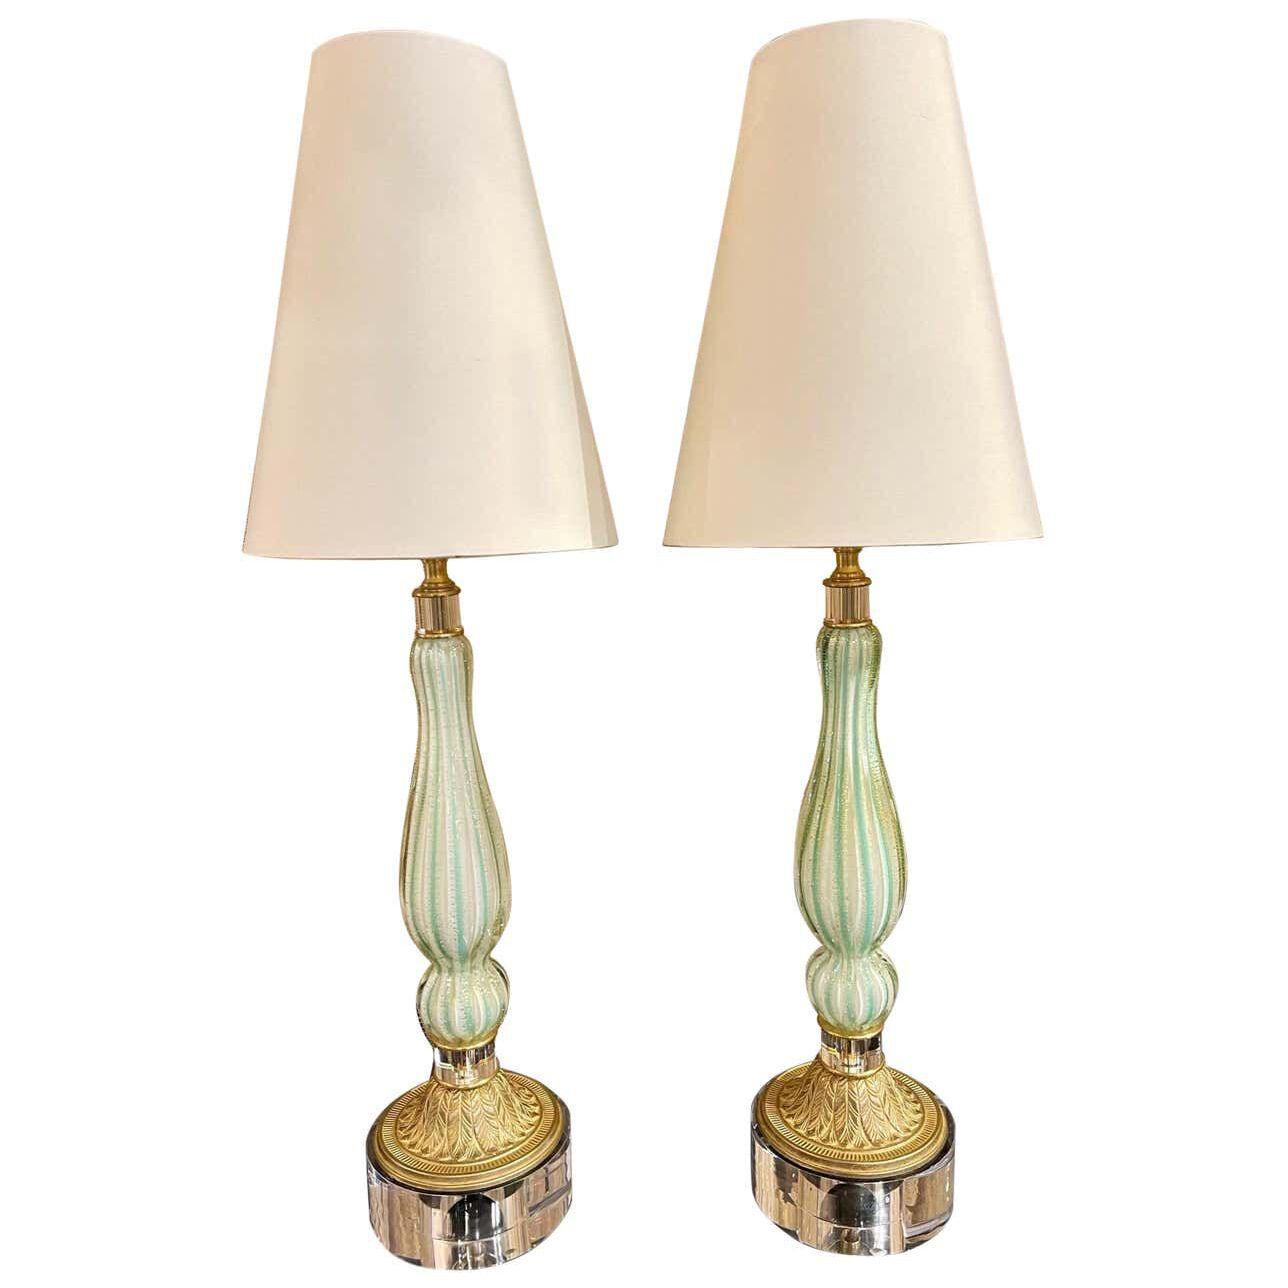 Pair of Vintage Murano Glass Lamps with Custom Gilt and Lucite Additions